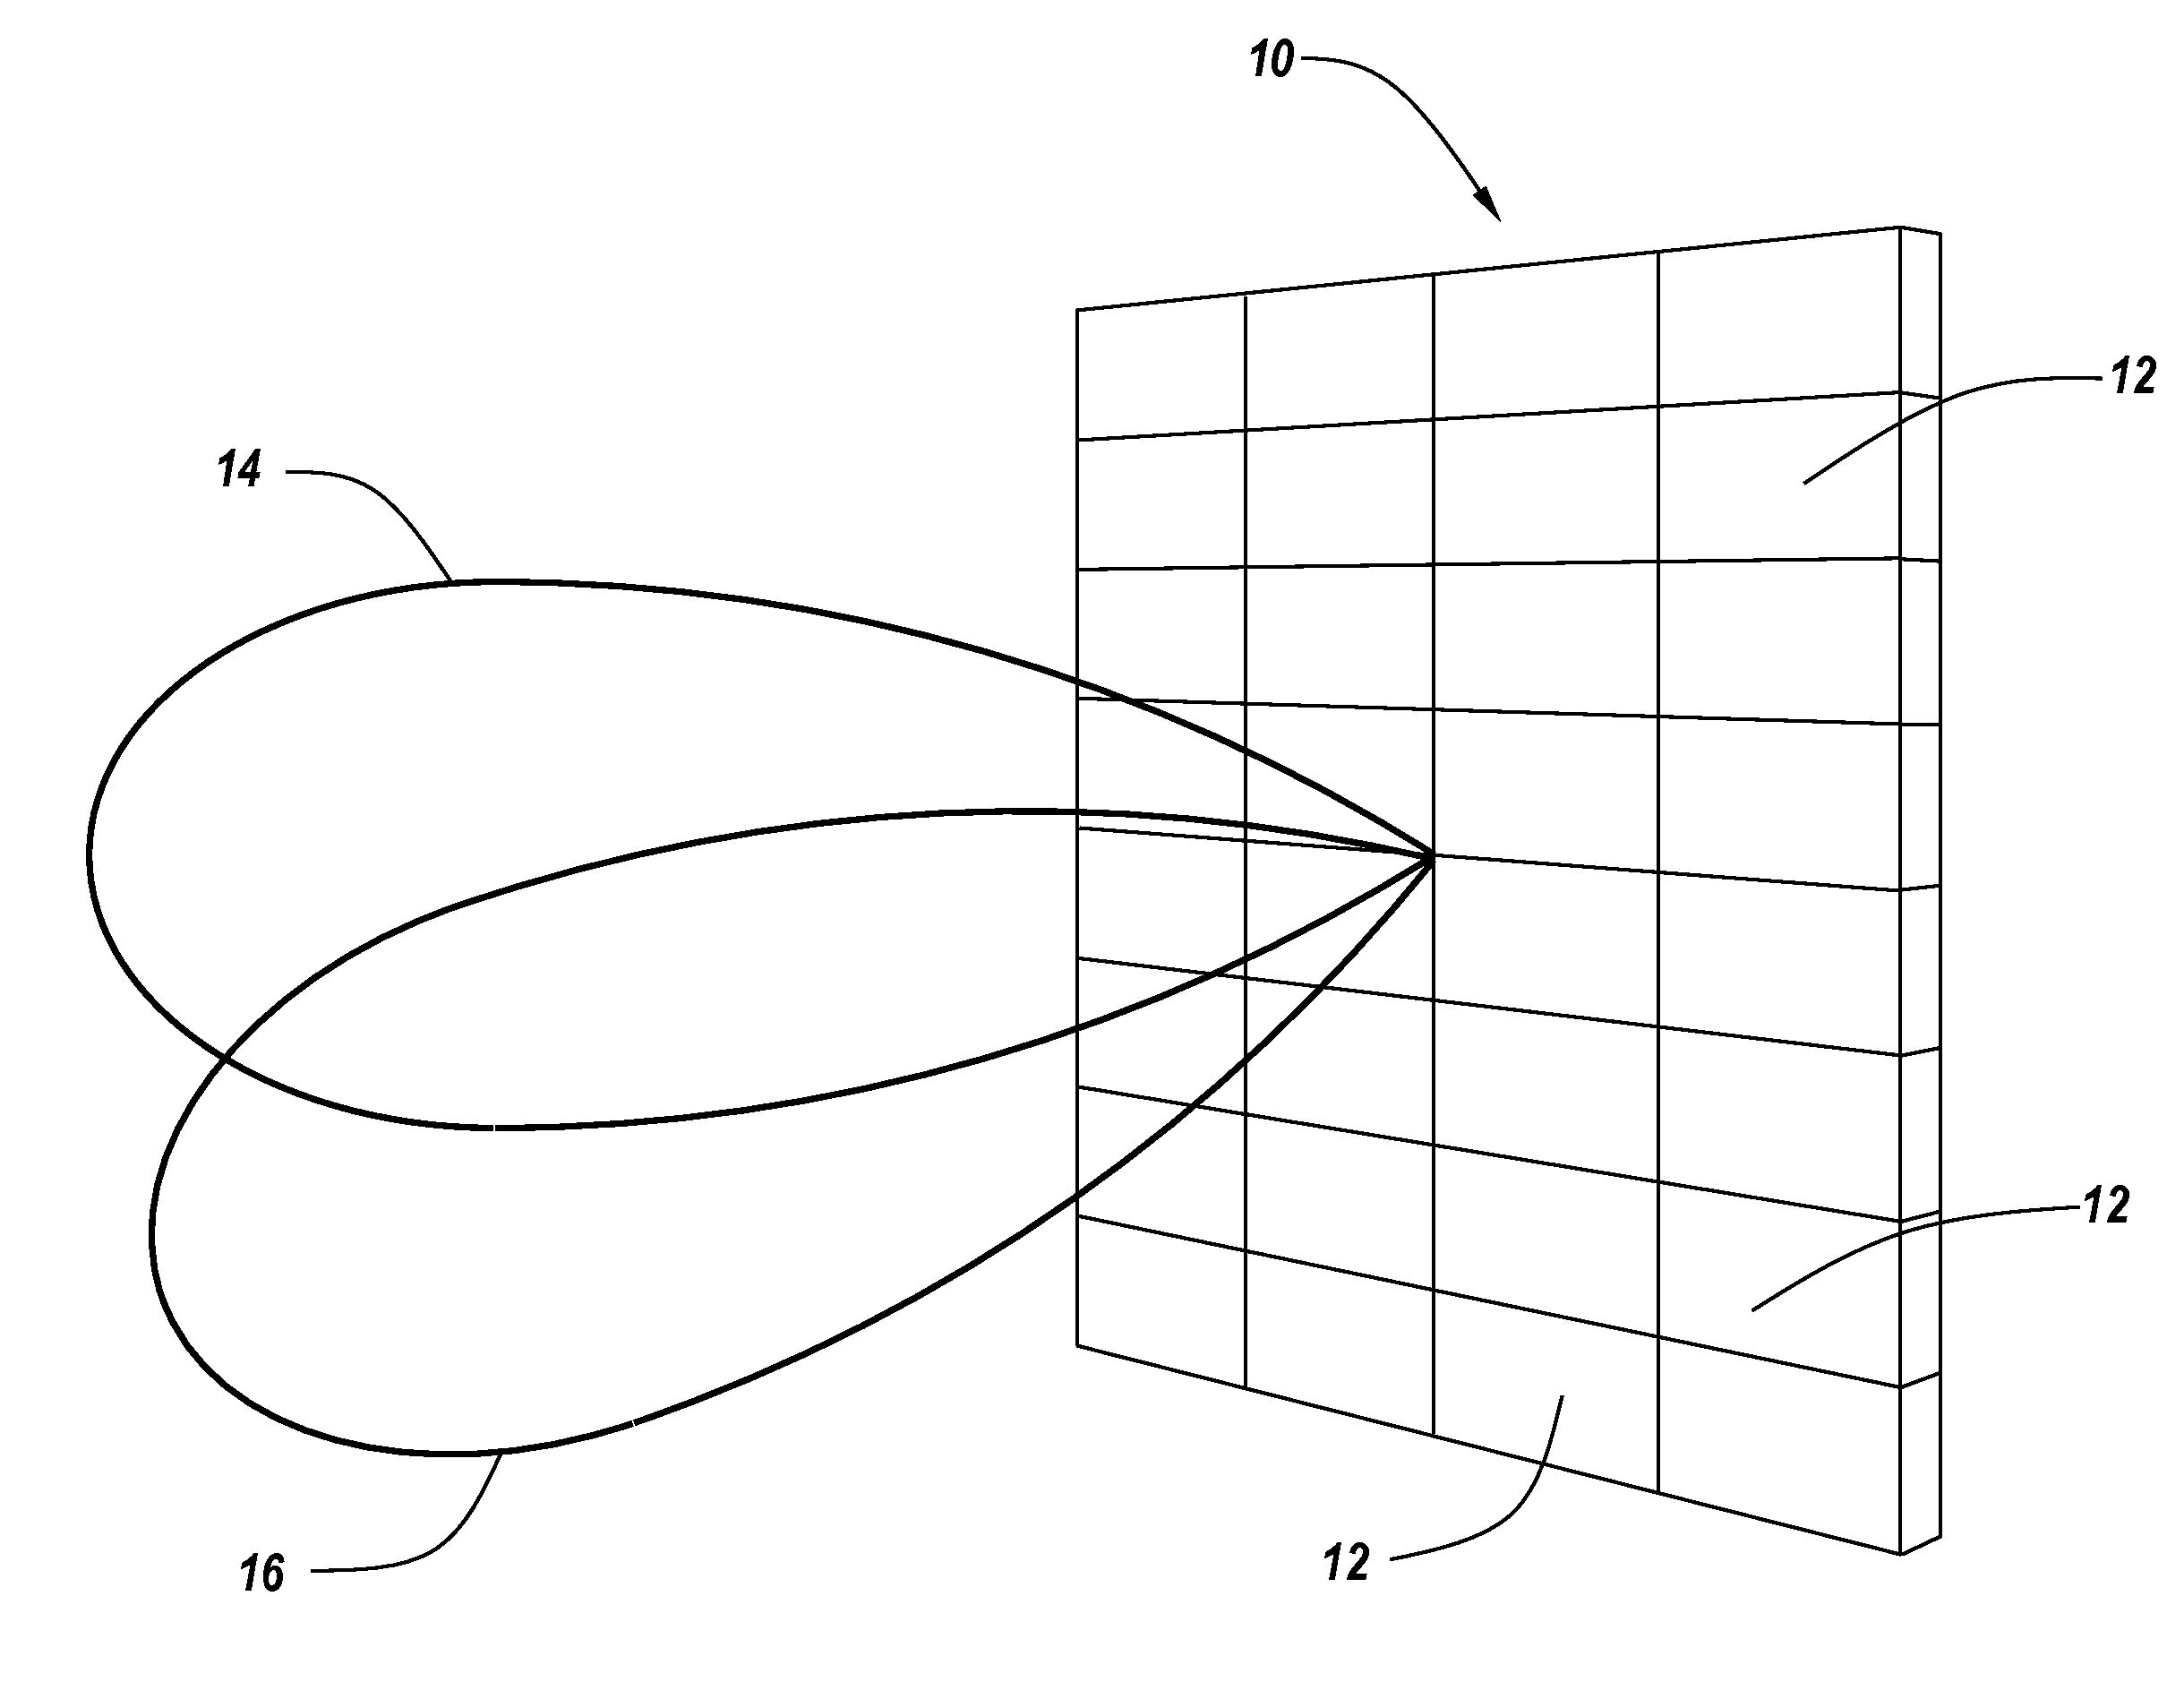 High-Power Microwave Beam Steerable Array and Related Methods